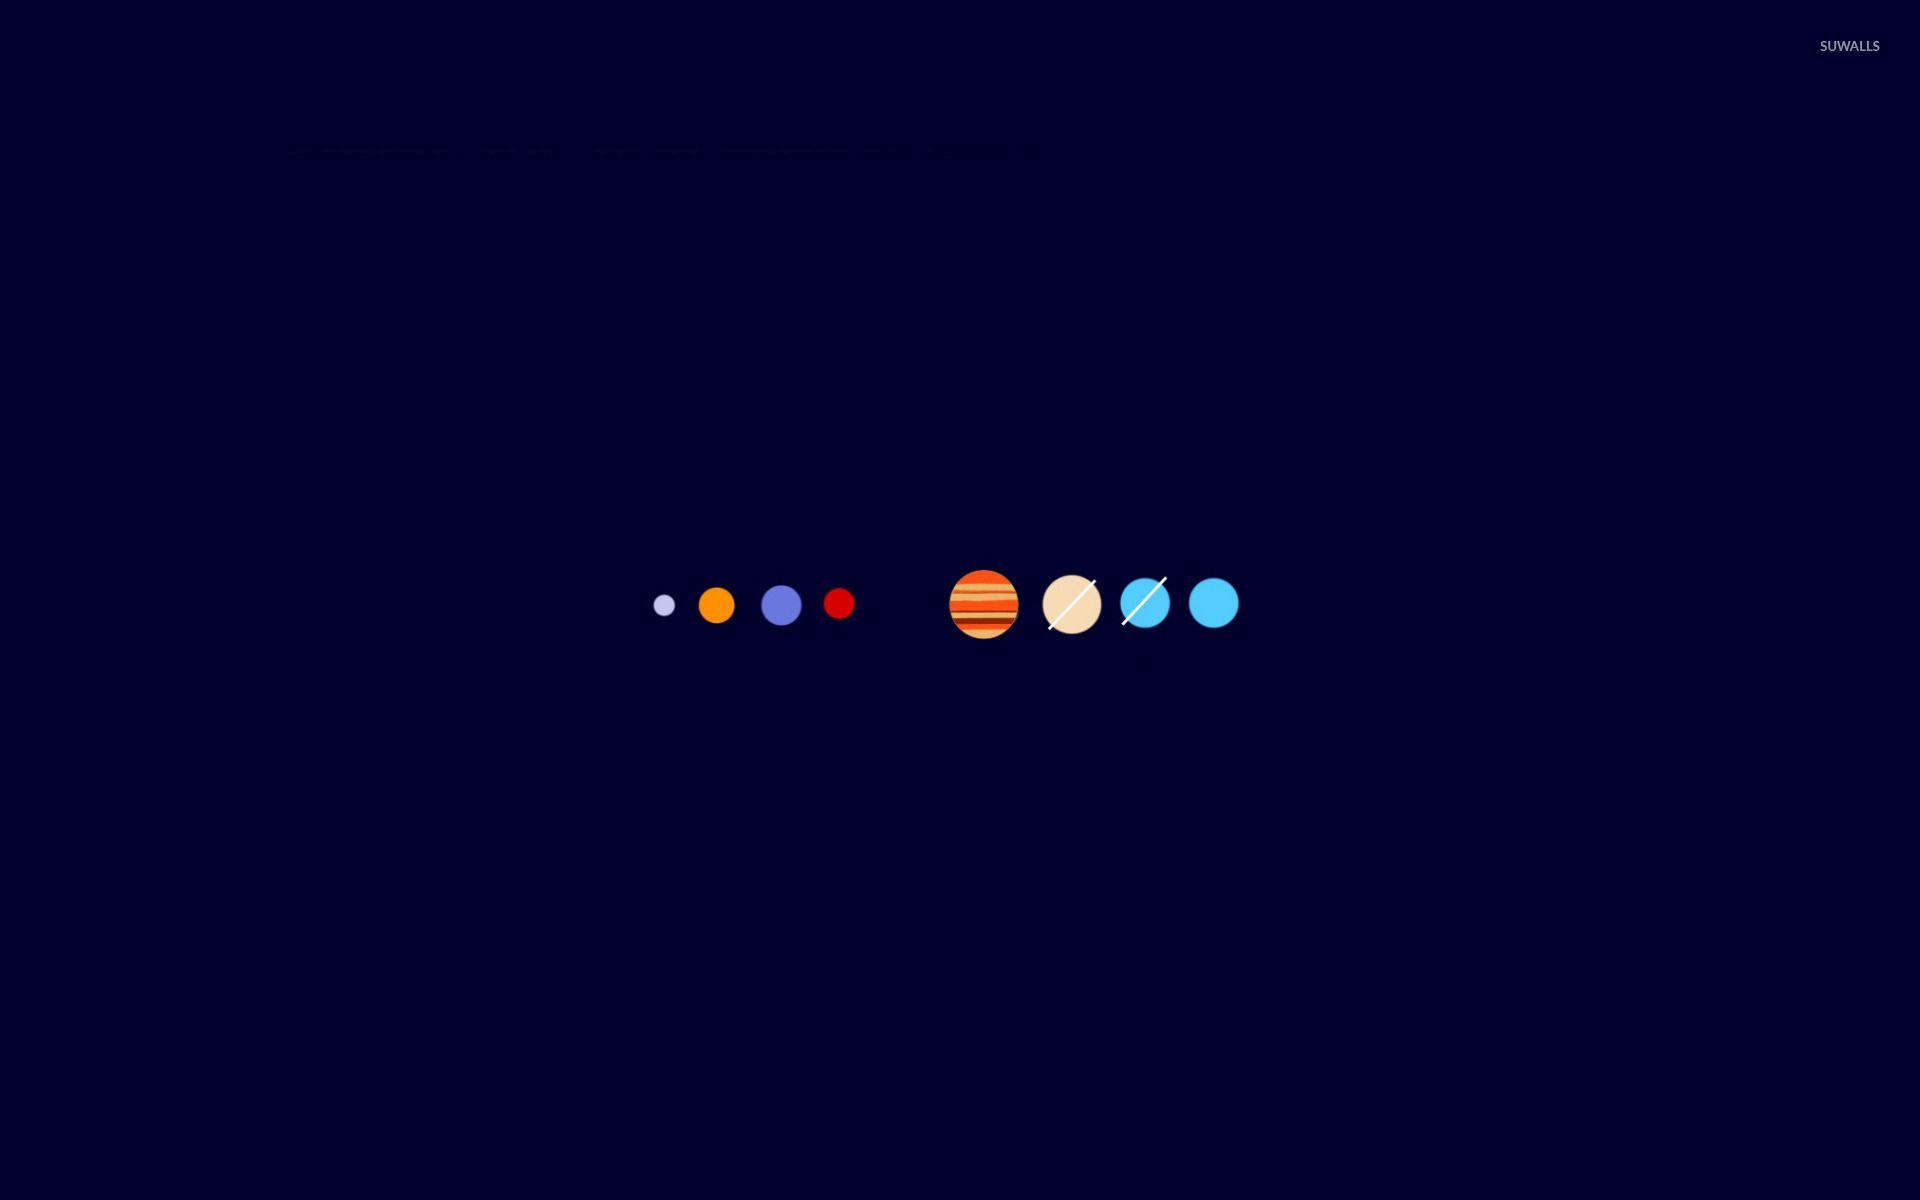 Cute Solar System Wallpapers - Top Free Cute Solar System Backgrounds